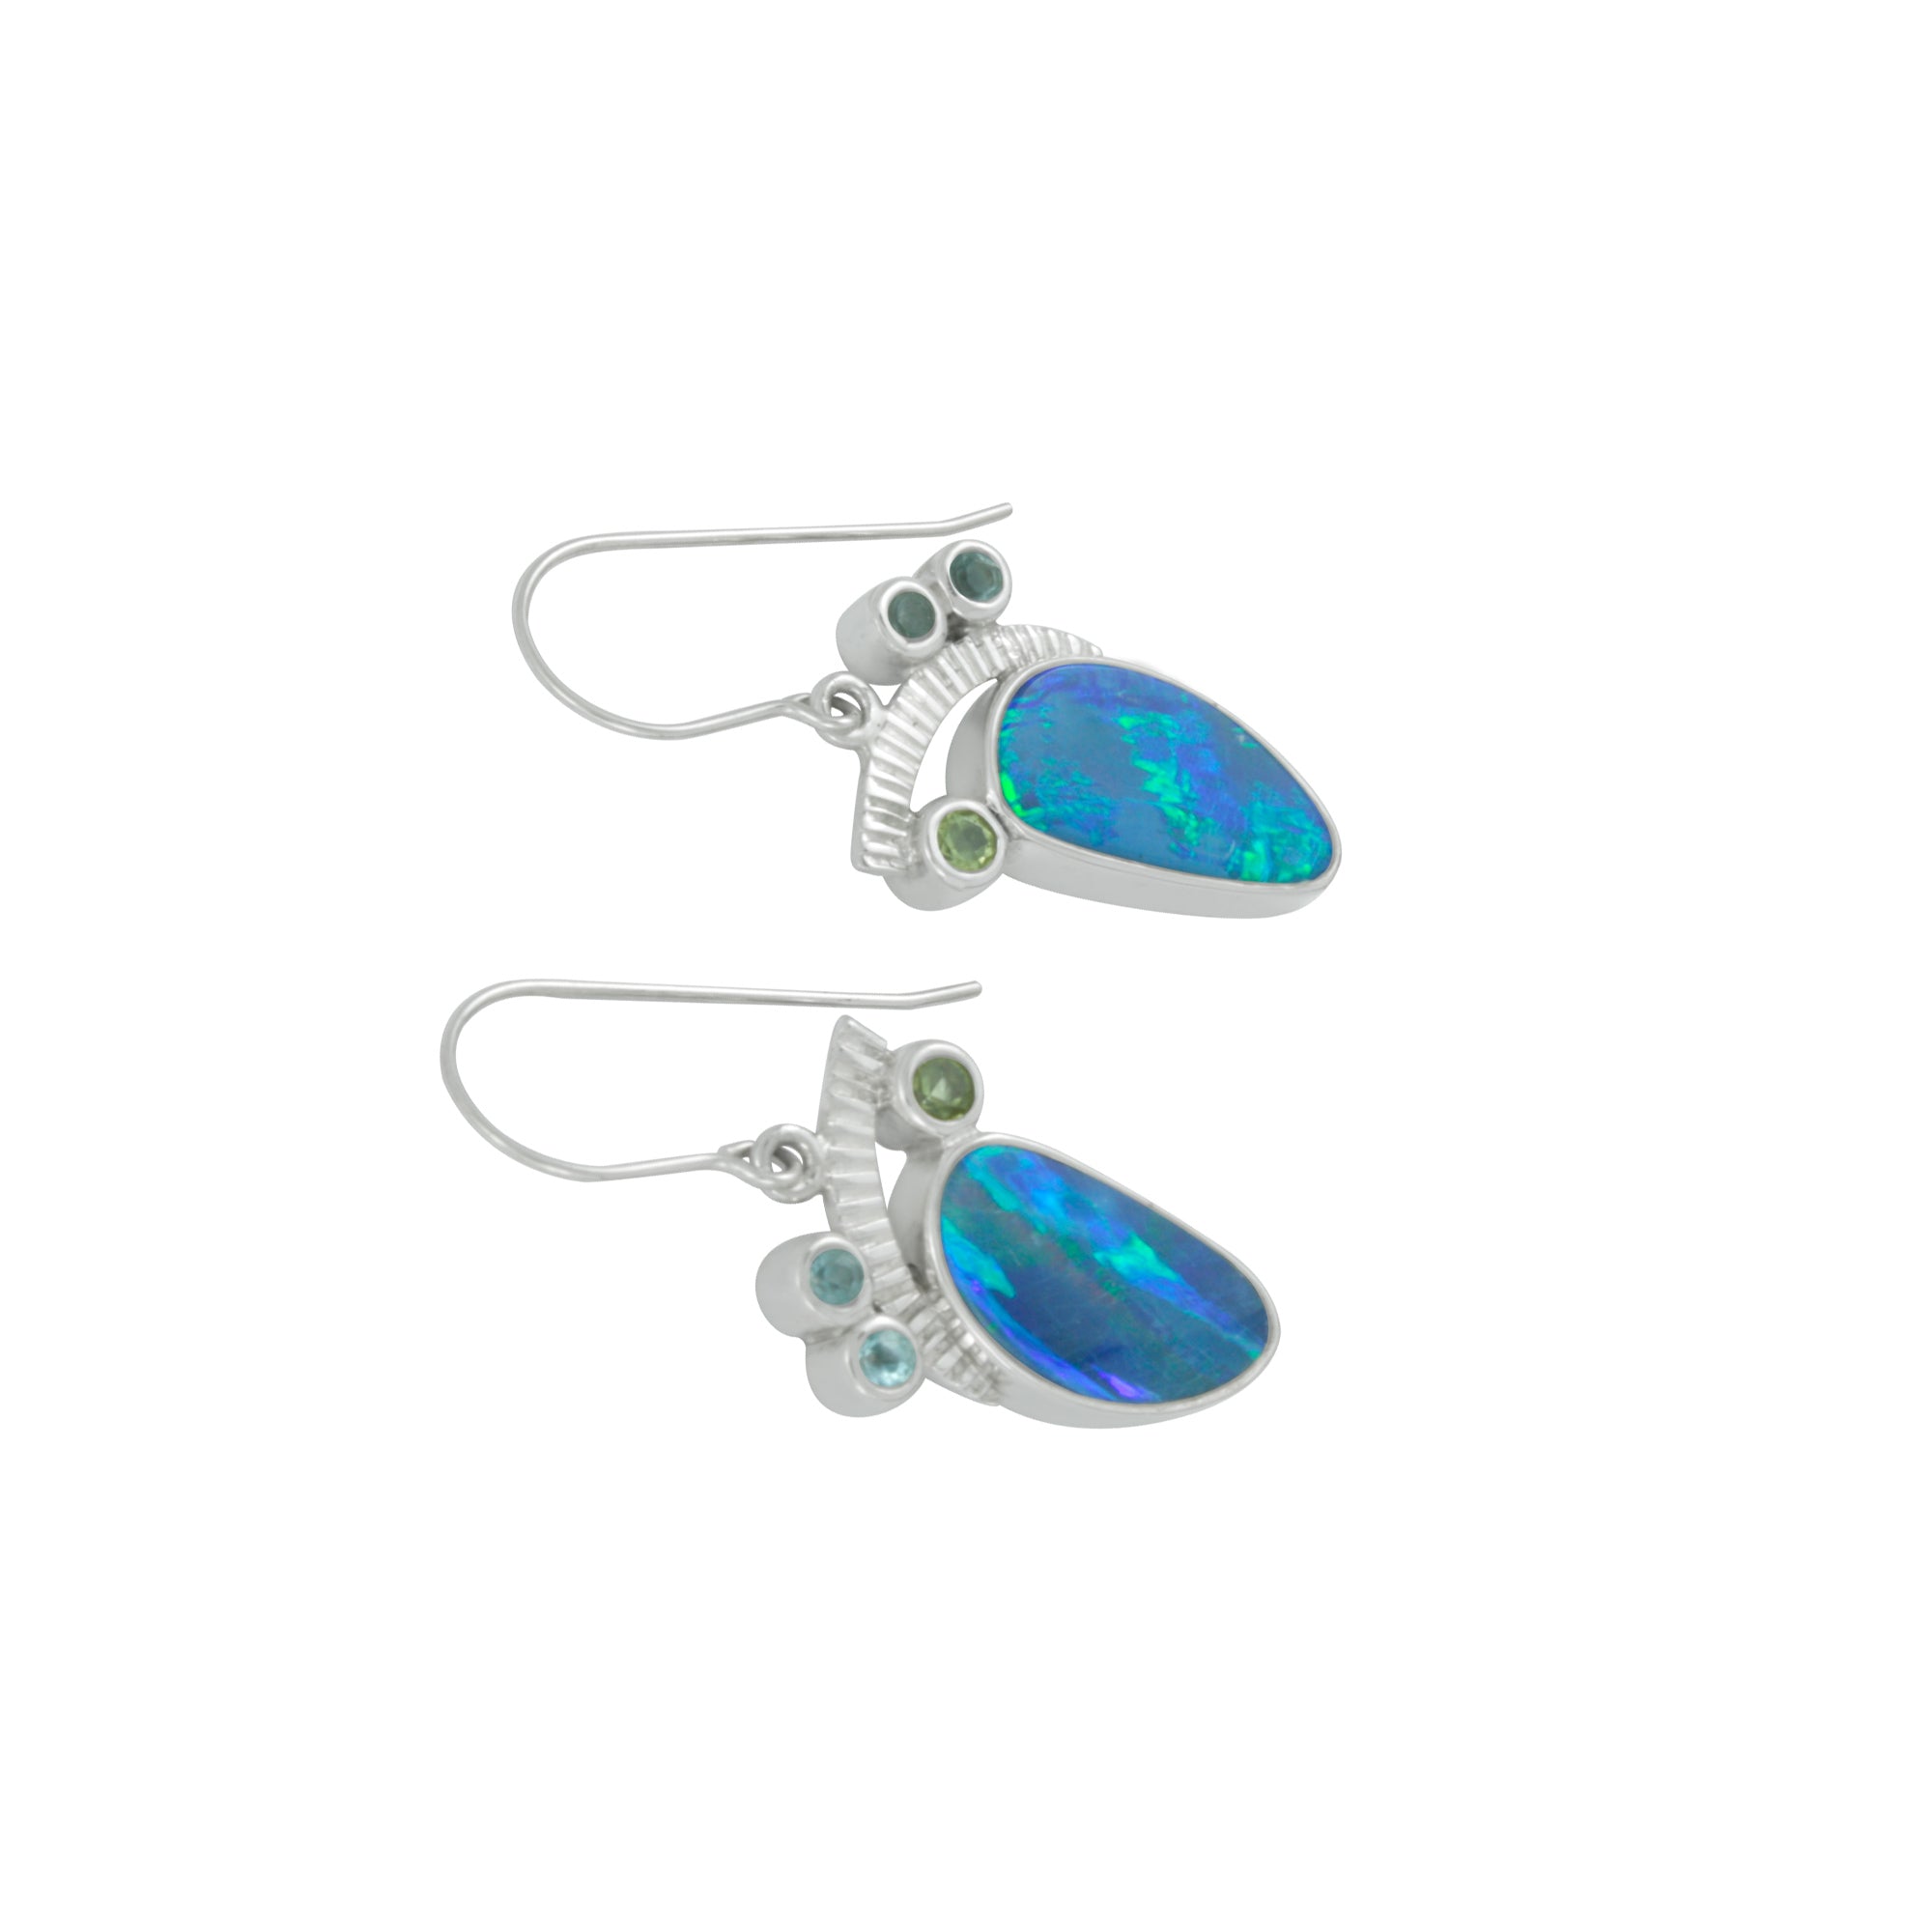 Stunning Opal Doublet Earrings accented with Peridot & Blue Topaz